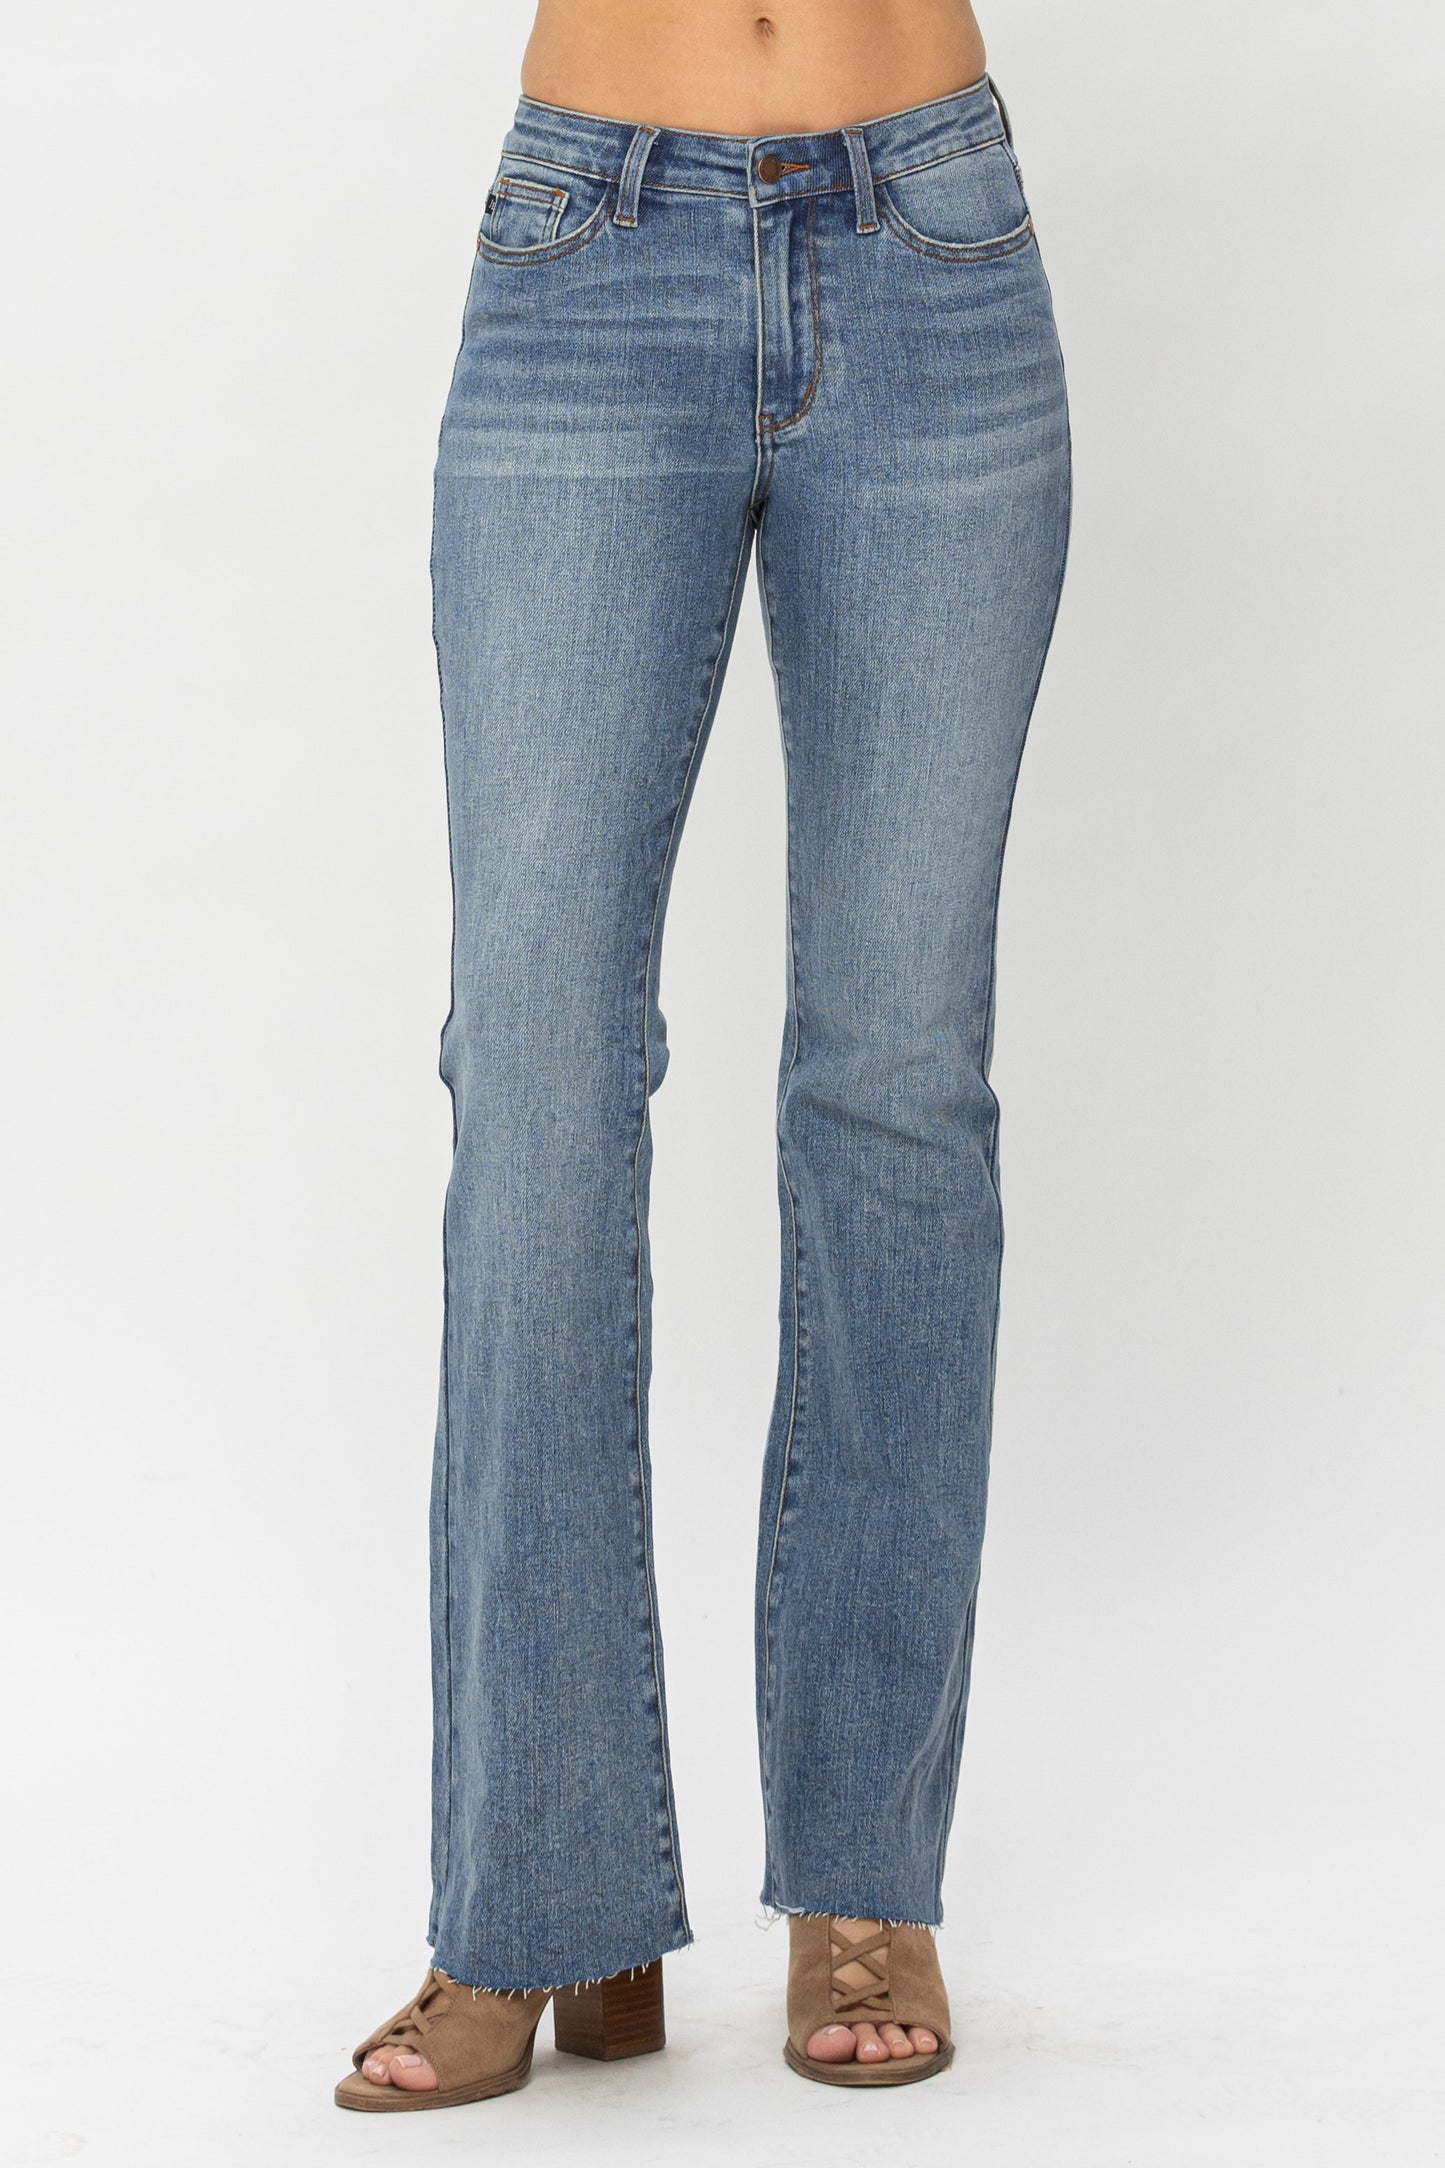 Behind Blue Eyes - Judy blue Raw Hem Wide Trouser Jeans – Resort to Style